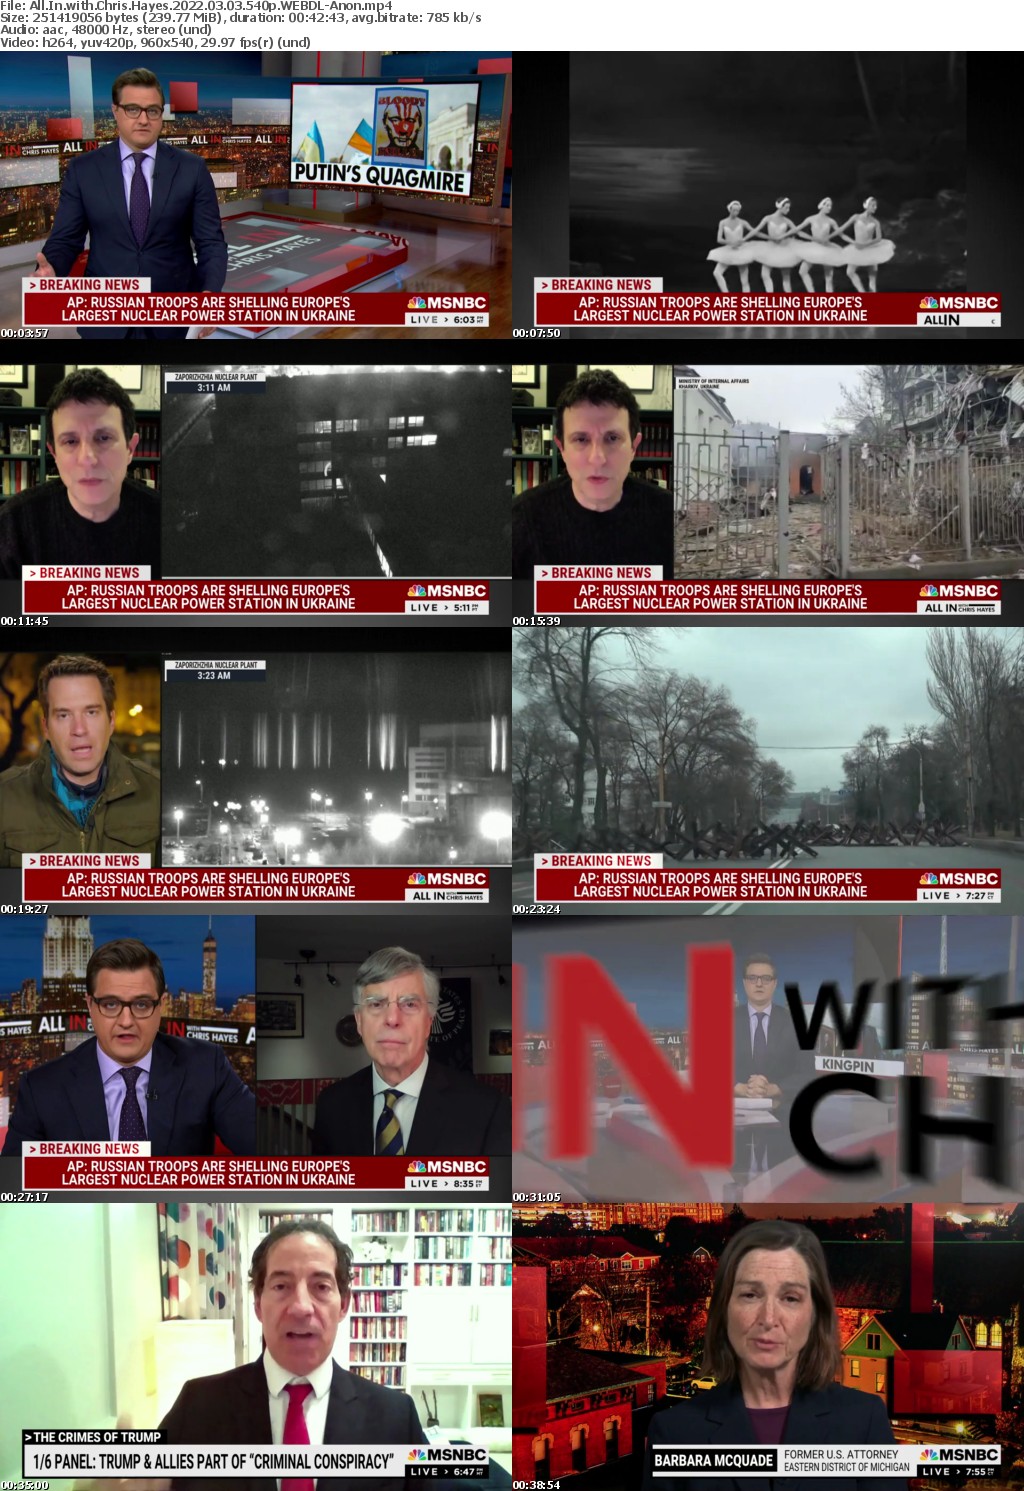 All In with Chris Hayes 2022 03 03 540p WEBDL-Anon